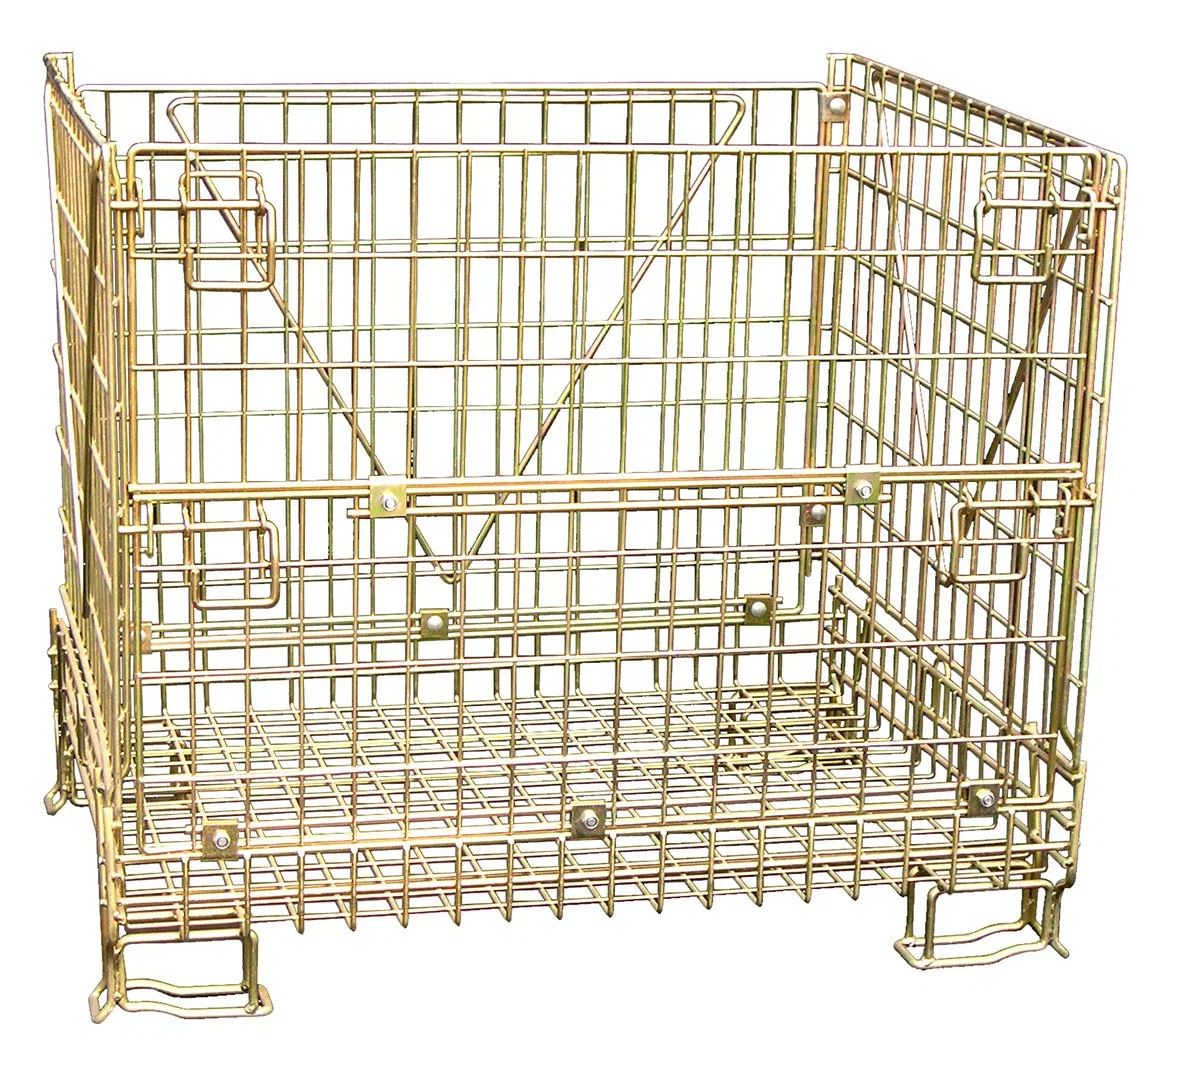 Pet Preform Storage Steel Welded Collapsible Wire Mesh Basket Container